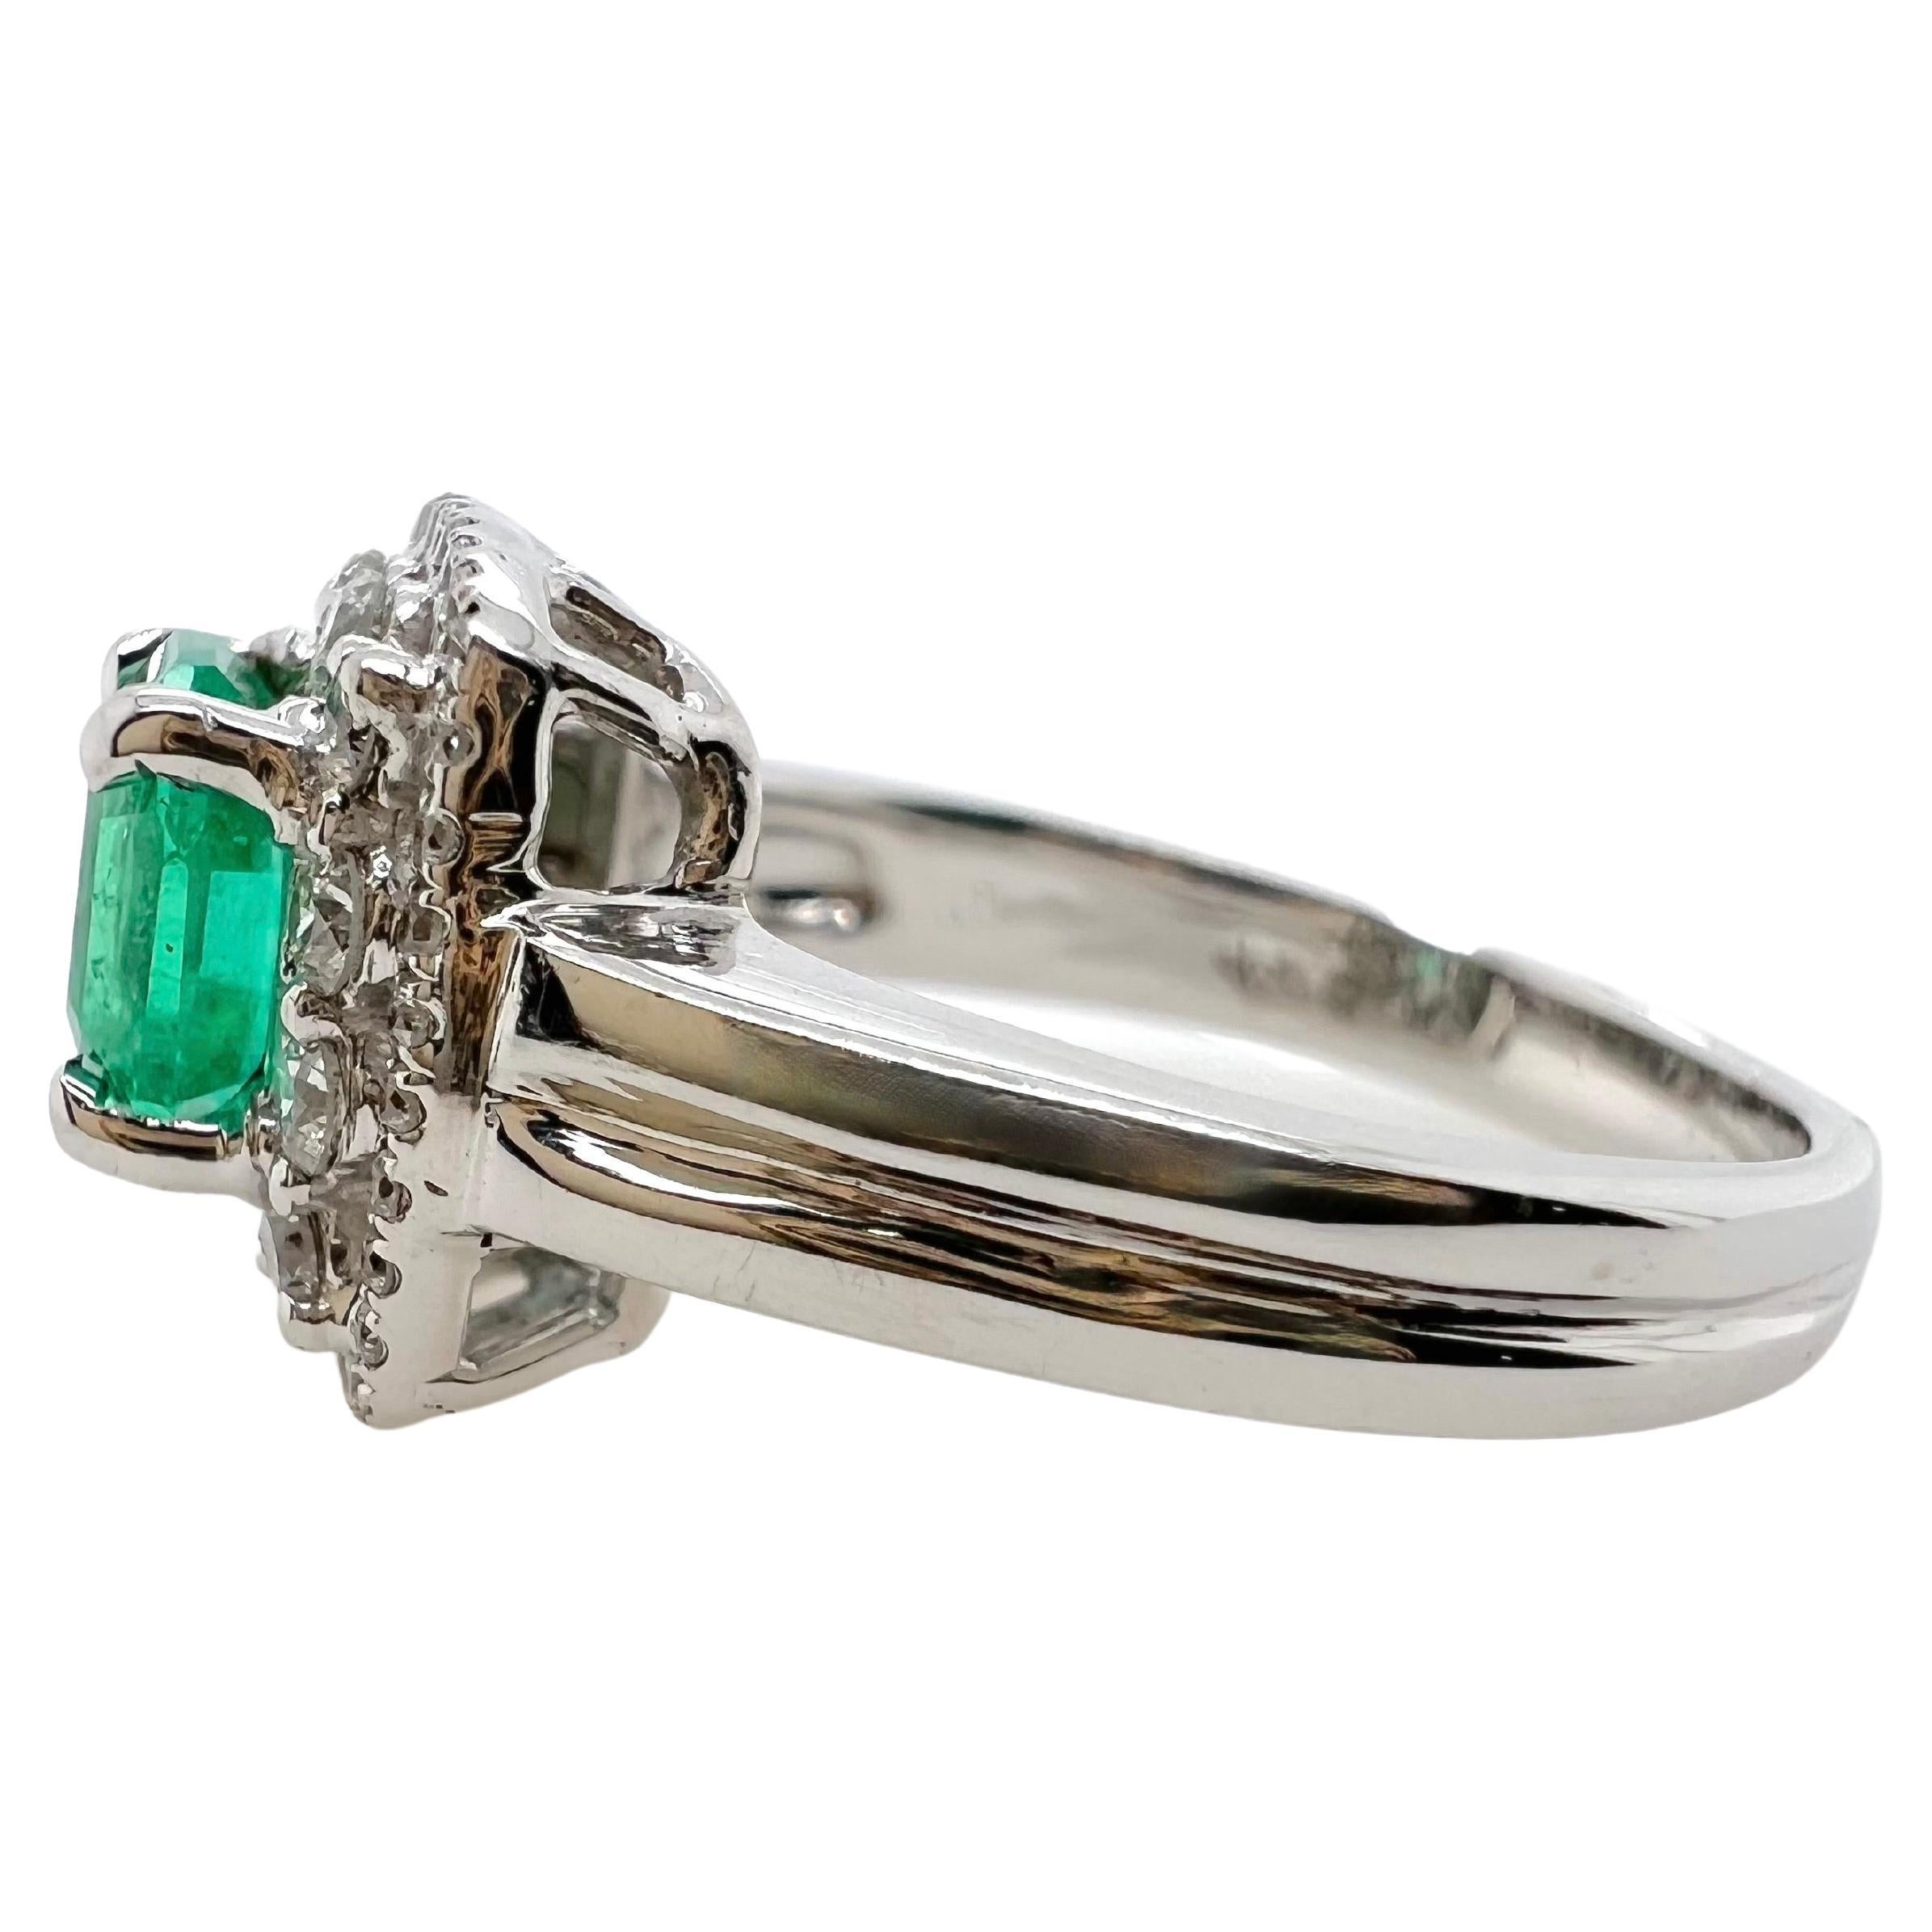 This beautiful emerald ring is set in 14k white gold mounting with diamonds.  The emerald is surrounded by a double halo diamond setting that gives a gorgeous look!


Size: 5.75
Stone: Emerald 0.86 ct
Diamonds: 0.44 ct total weight 
Metal: 14k White